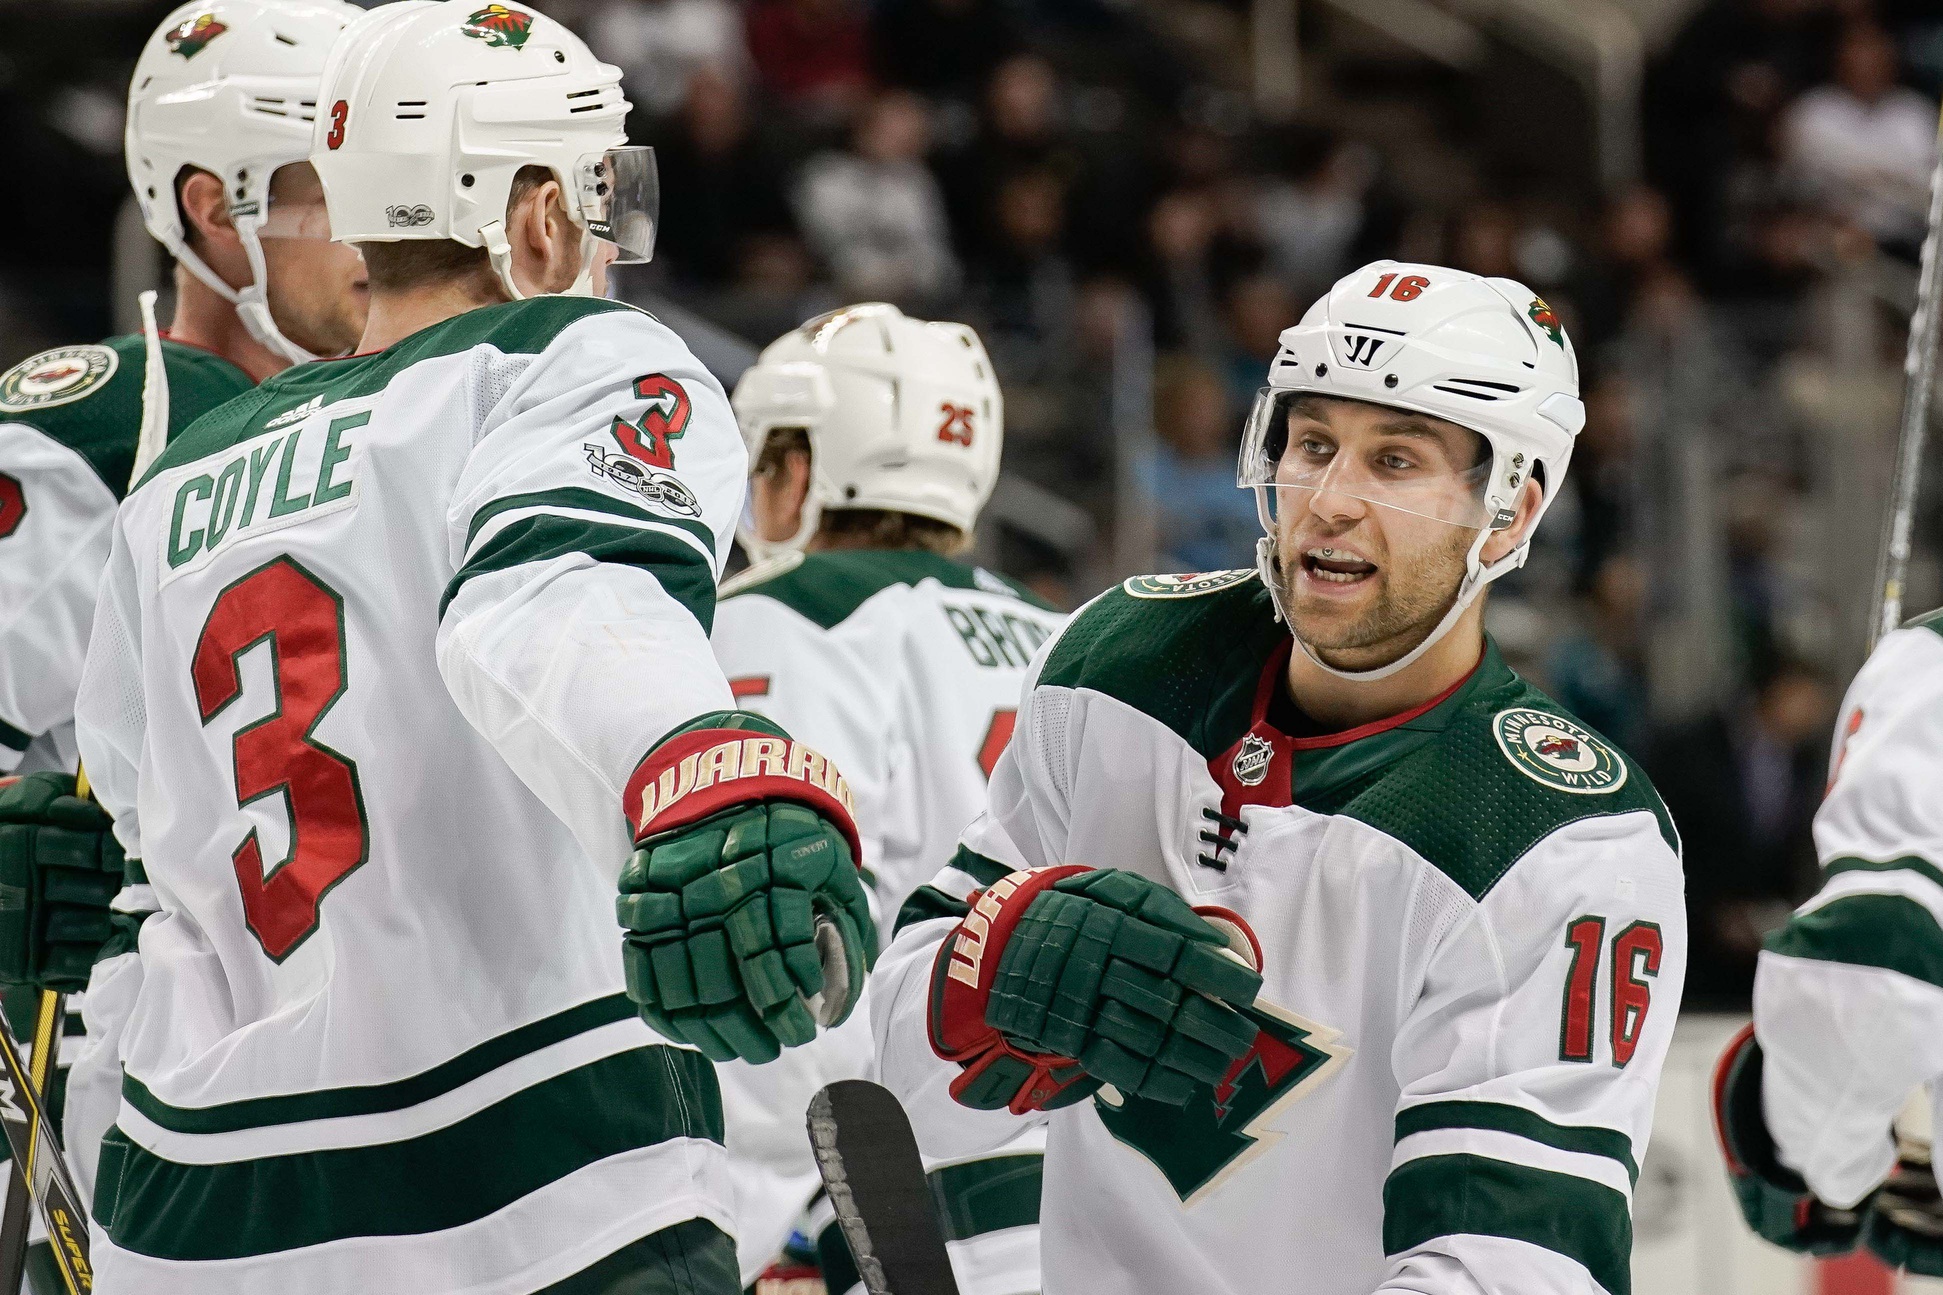 Minnesota Wild's Mikael Granlund 'took it to a new level' with winning goal  – Twin Cities